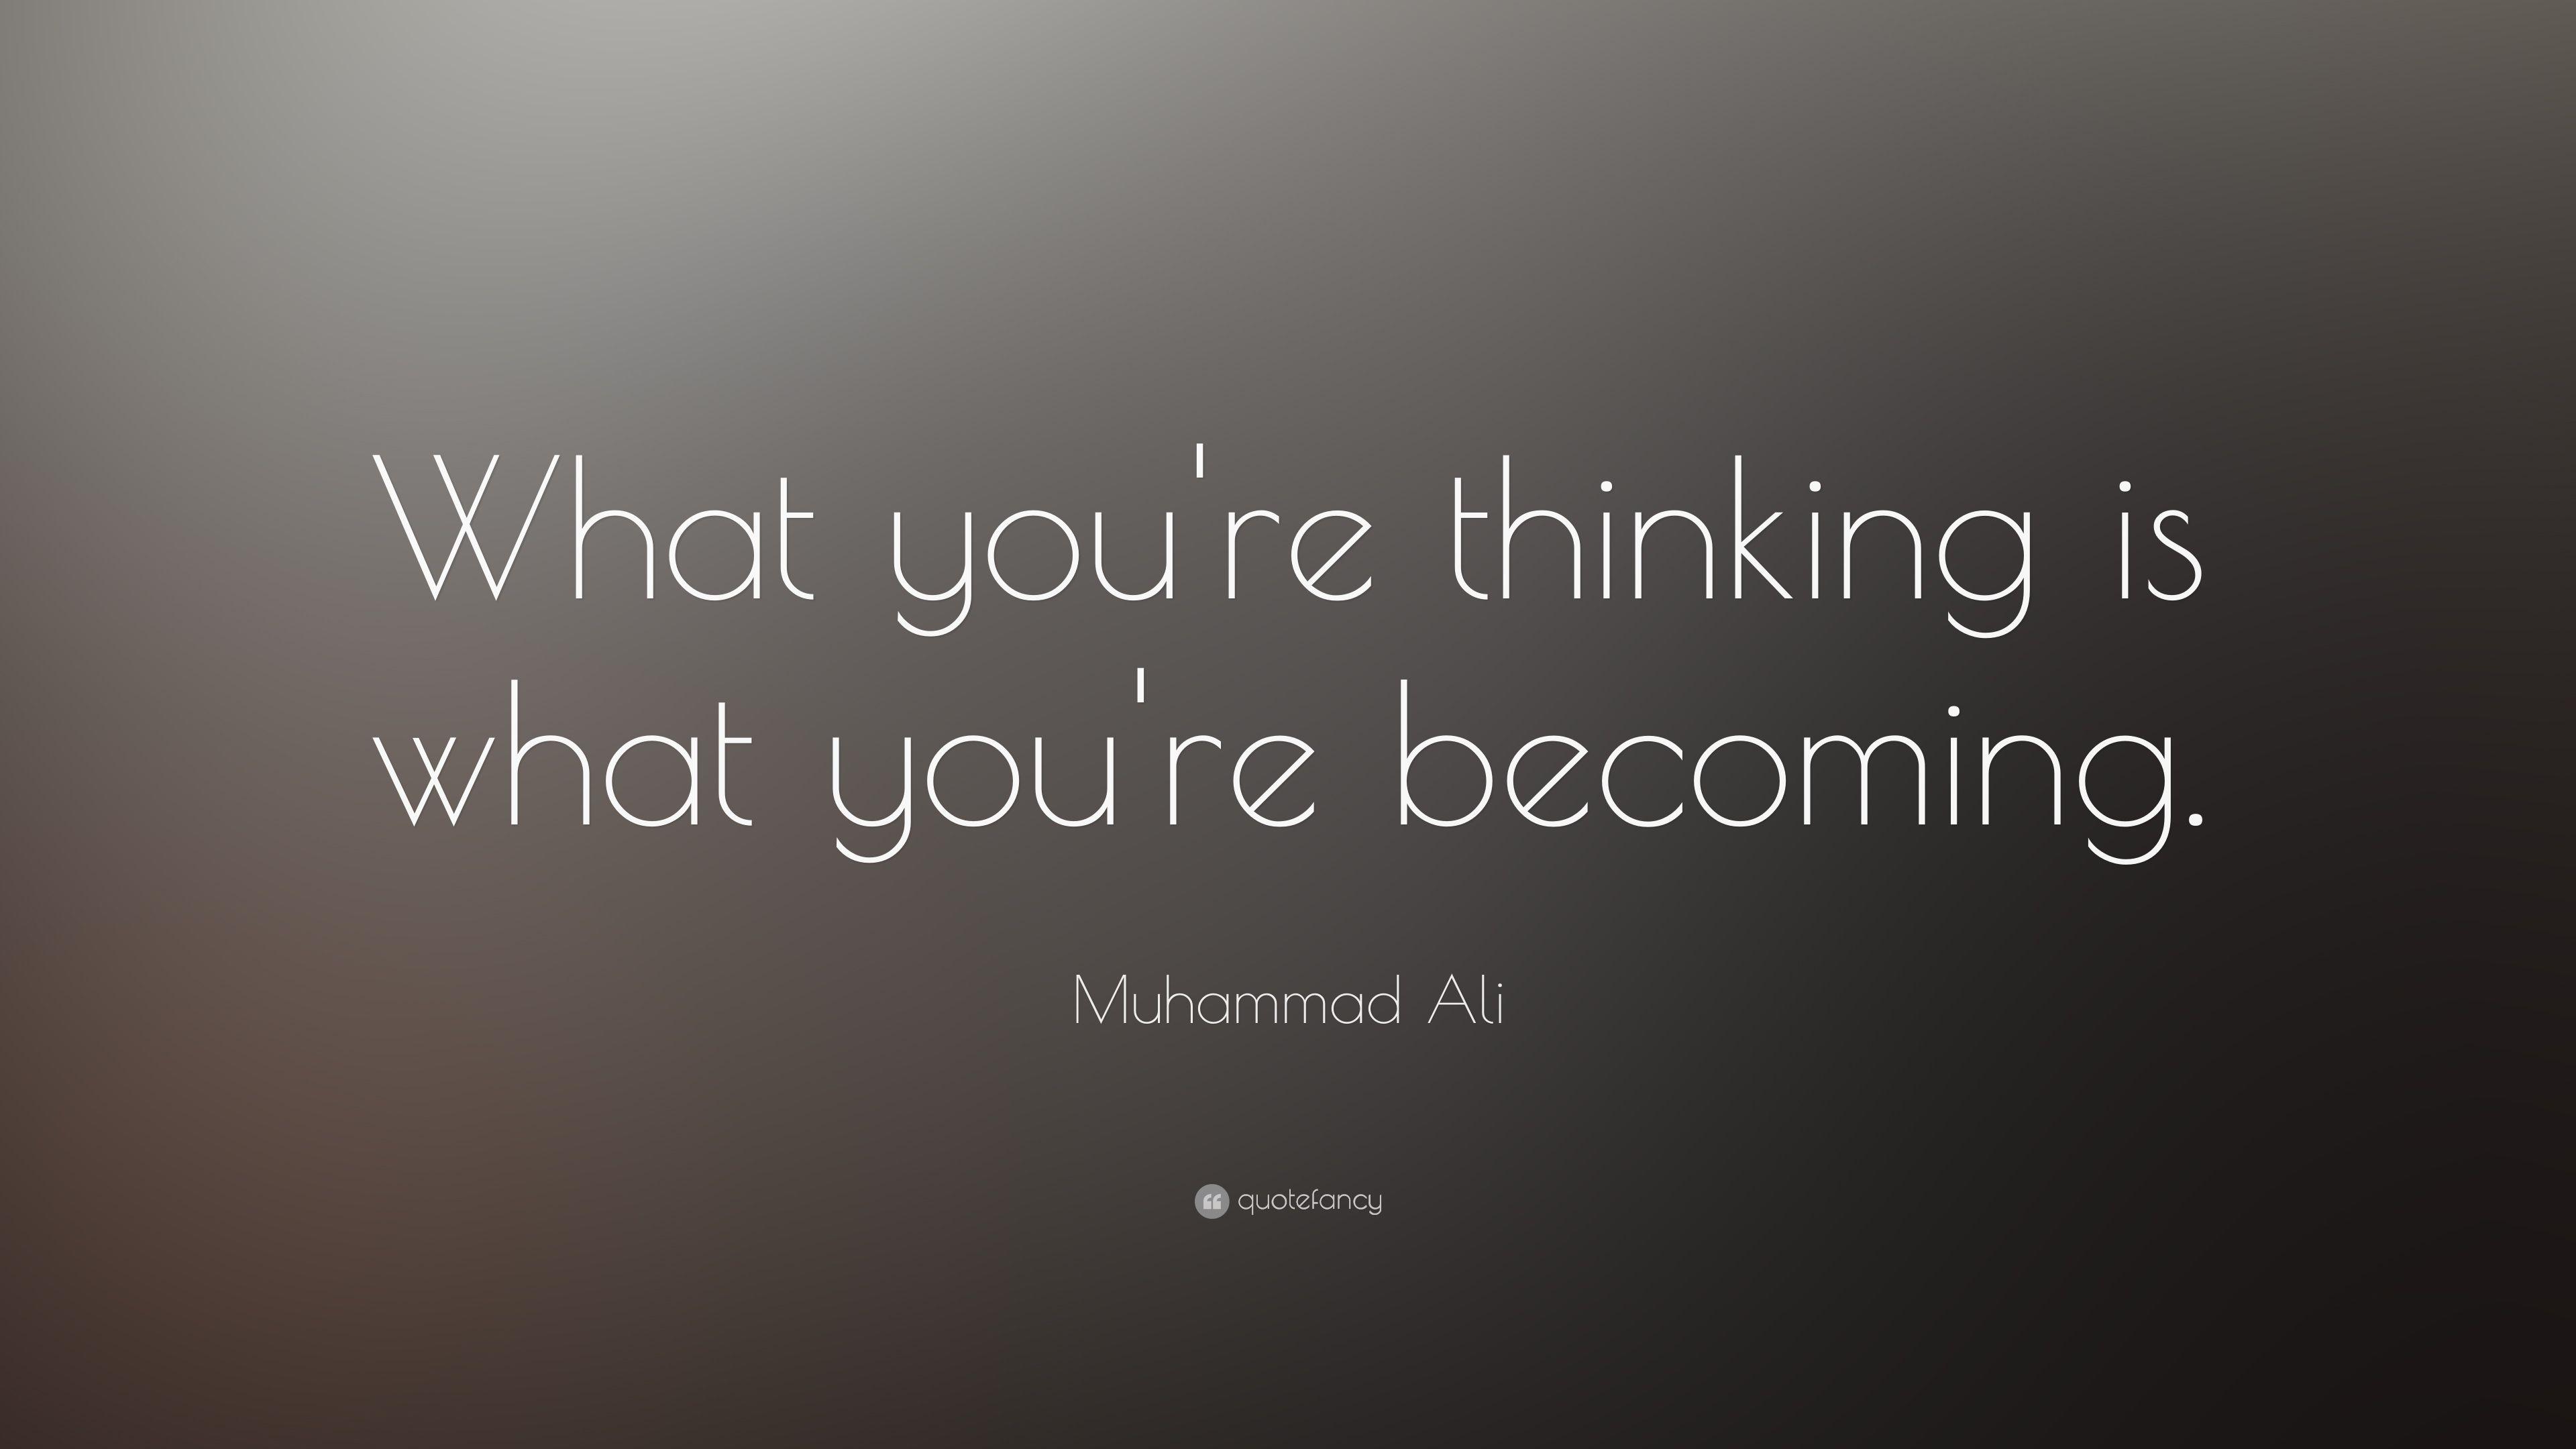 Muhammad Ali Quote: “What you're thinking is what you're becoming